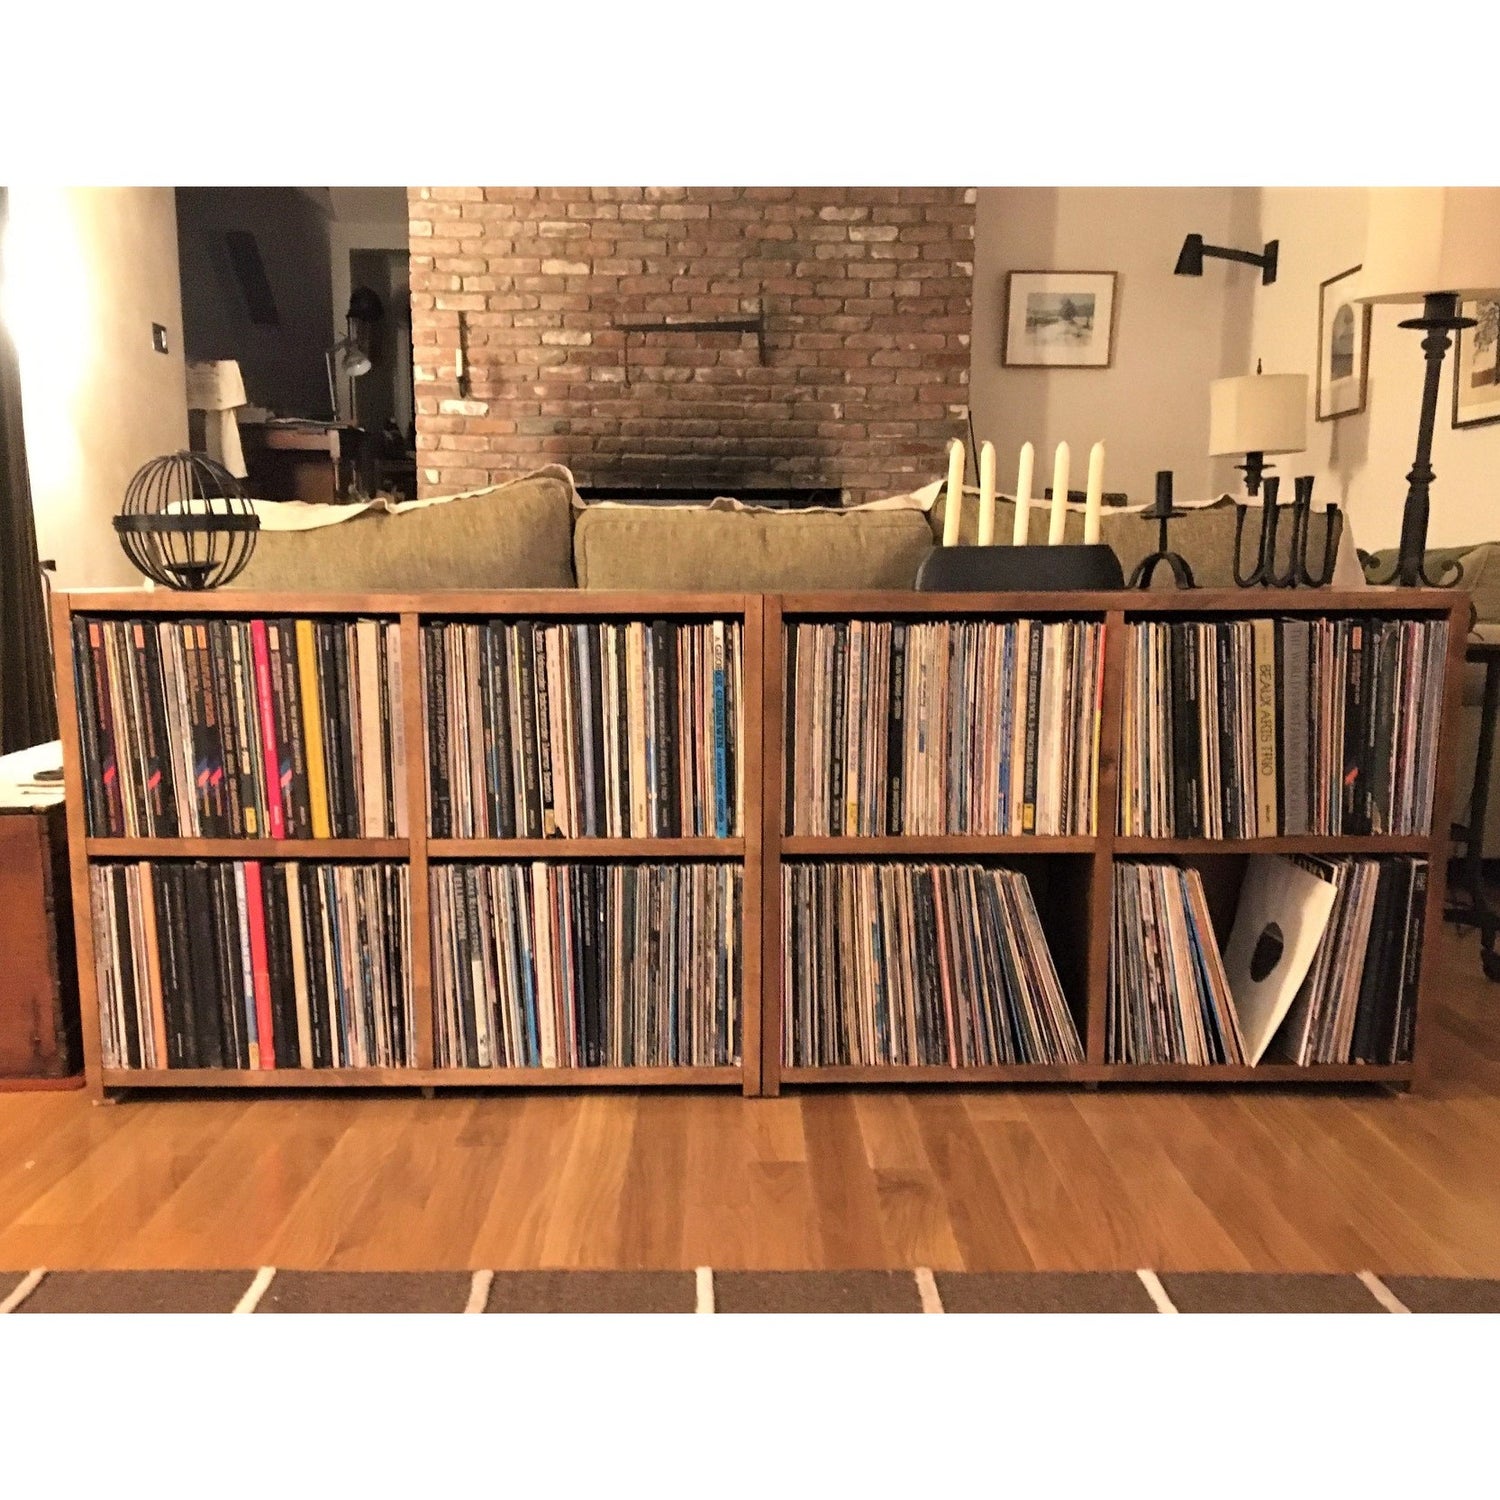 Low shelf and bookcase storage for LPs and record albums in birch with a stain shown from the front.